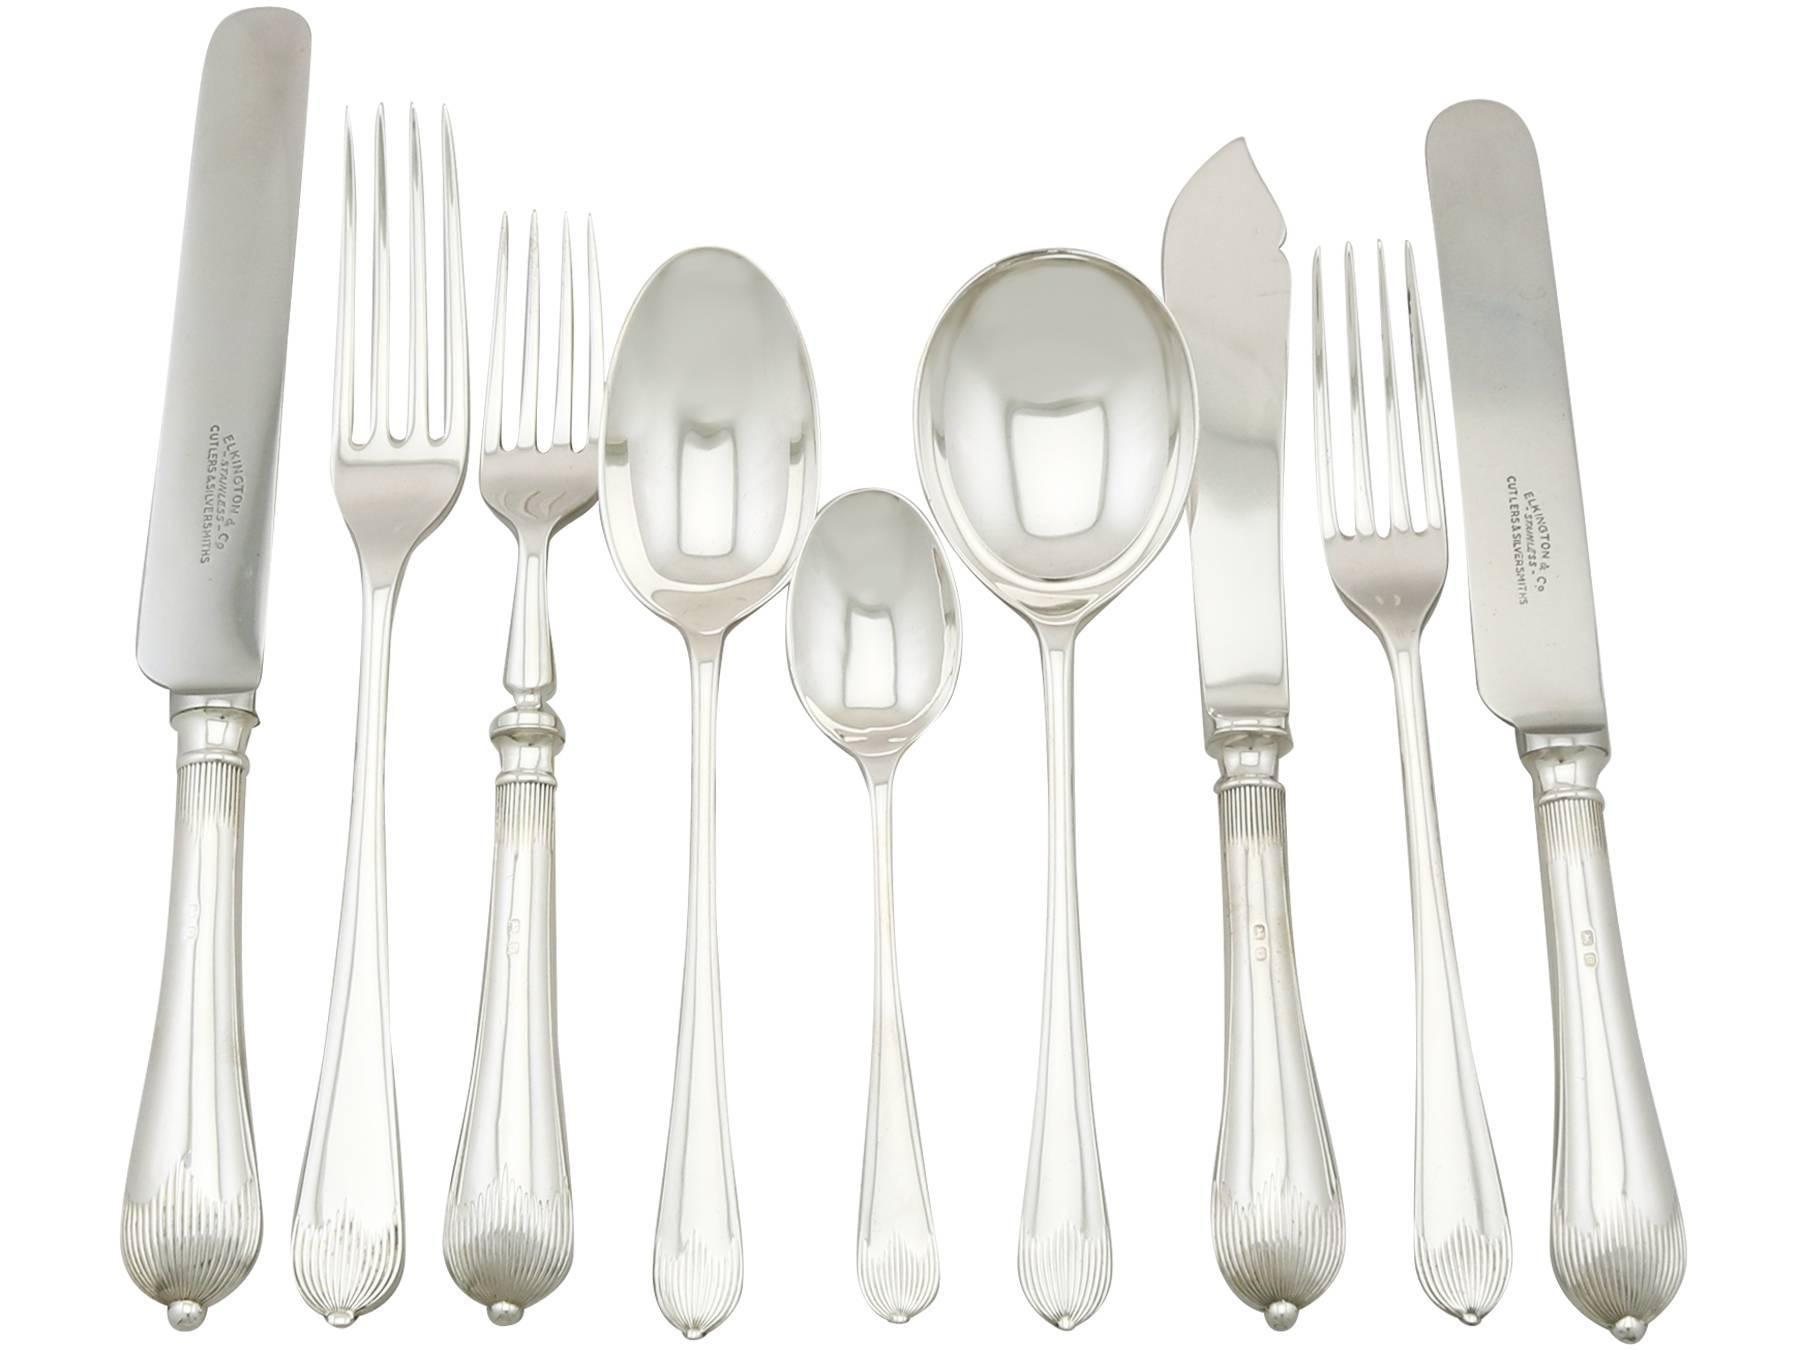 

An exceptional, fine and impressive, comprehensive antique George VI English straight sterling silver Georgian pattern flatware service for 12 persons; an addition to our canteen of cutlery collection.

The pieces of this exceptional antique